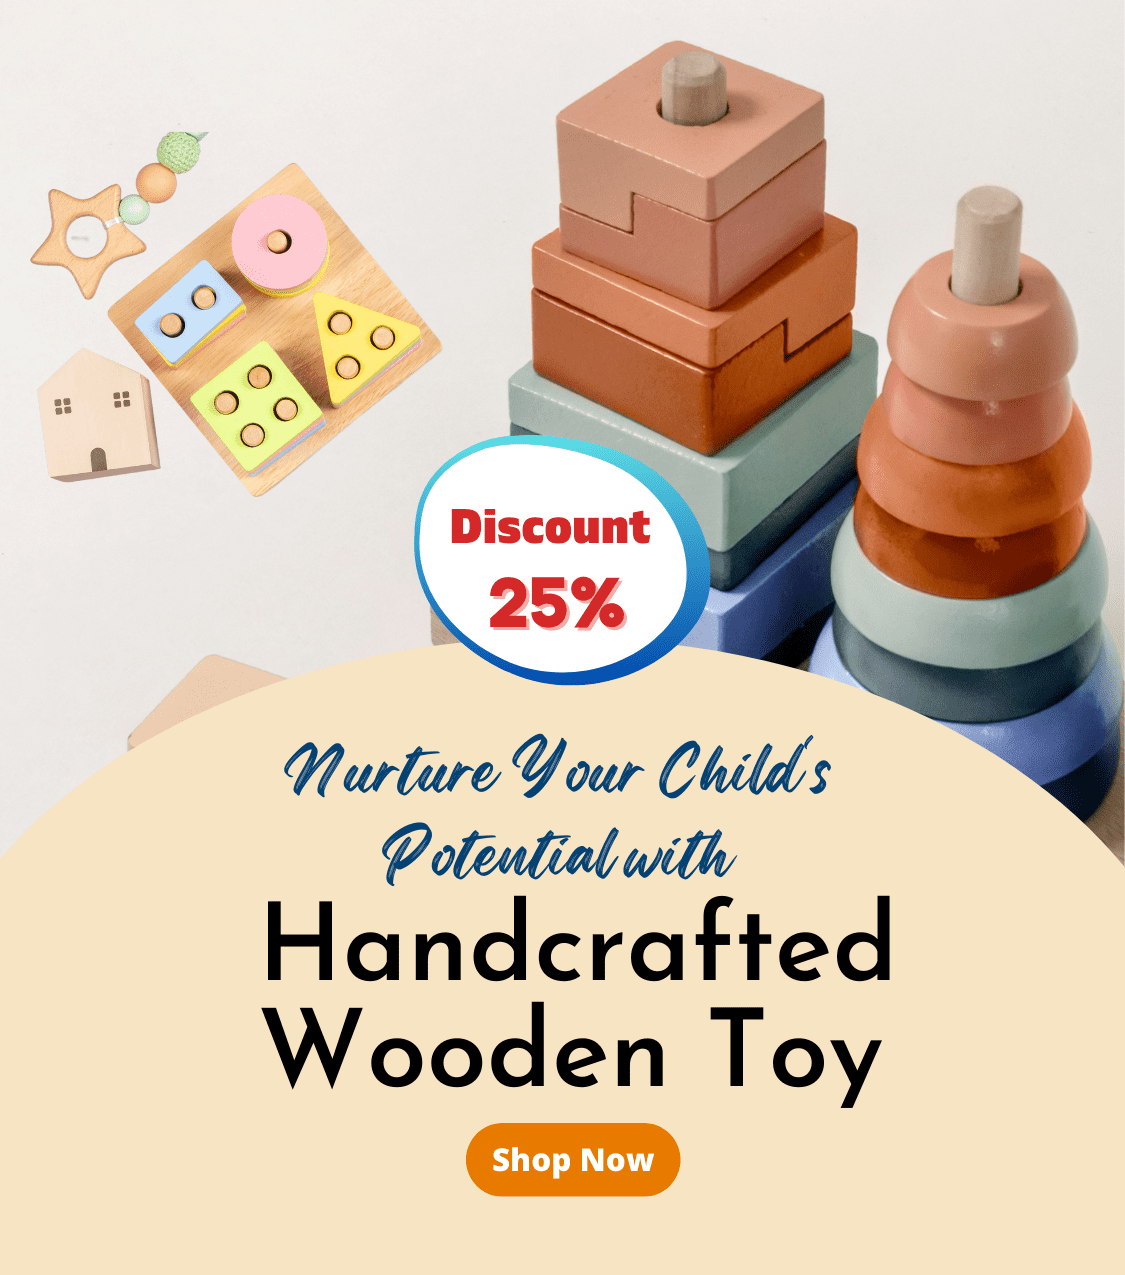 Handcrafted Wooden Toy